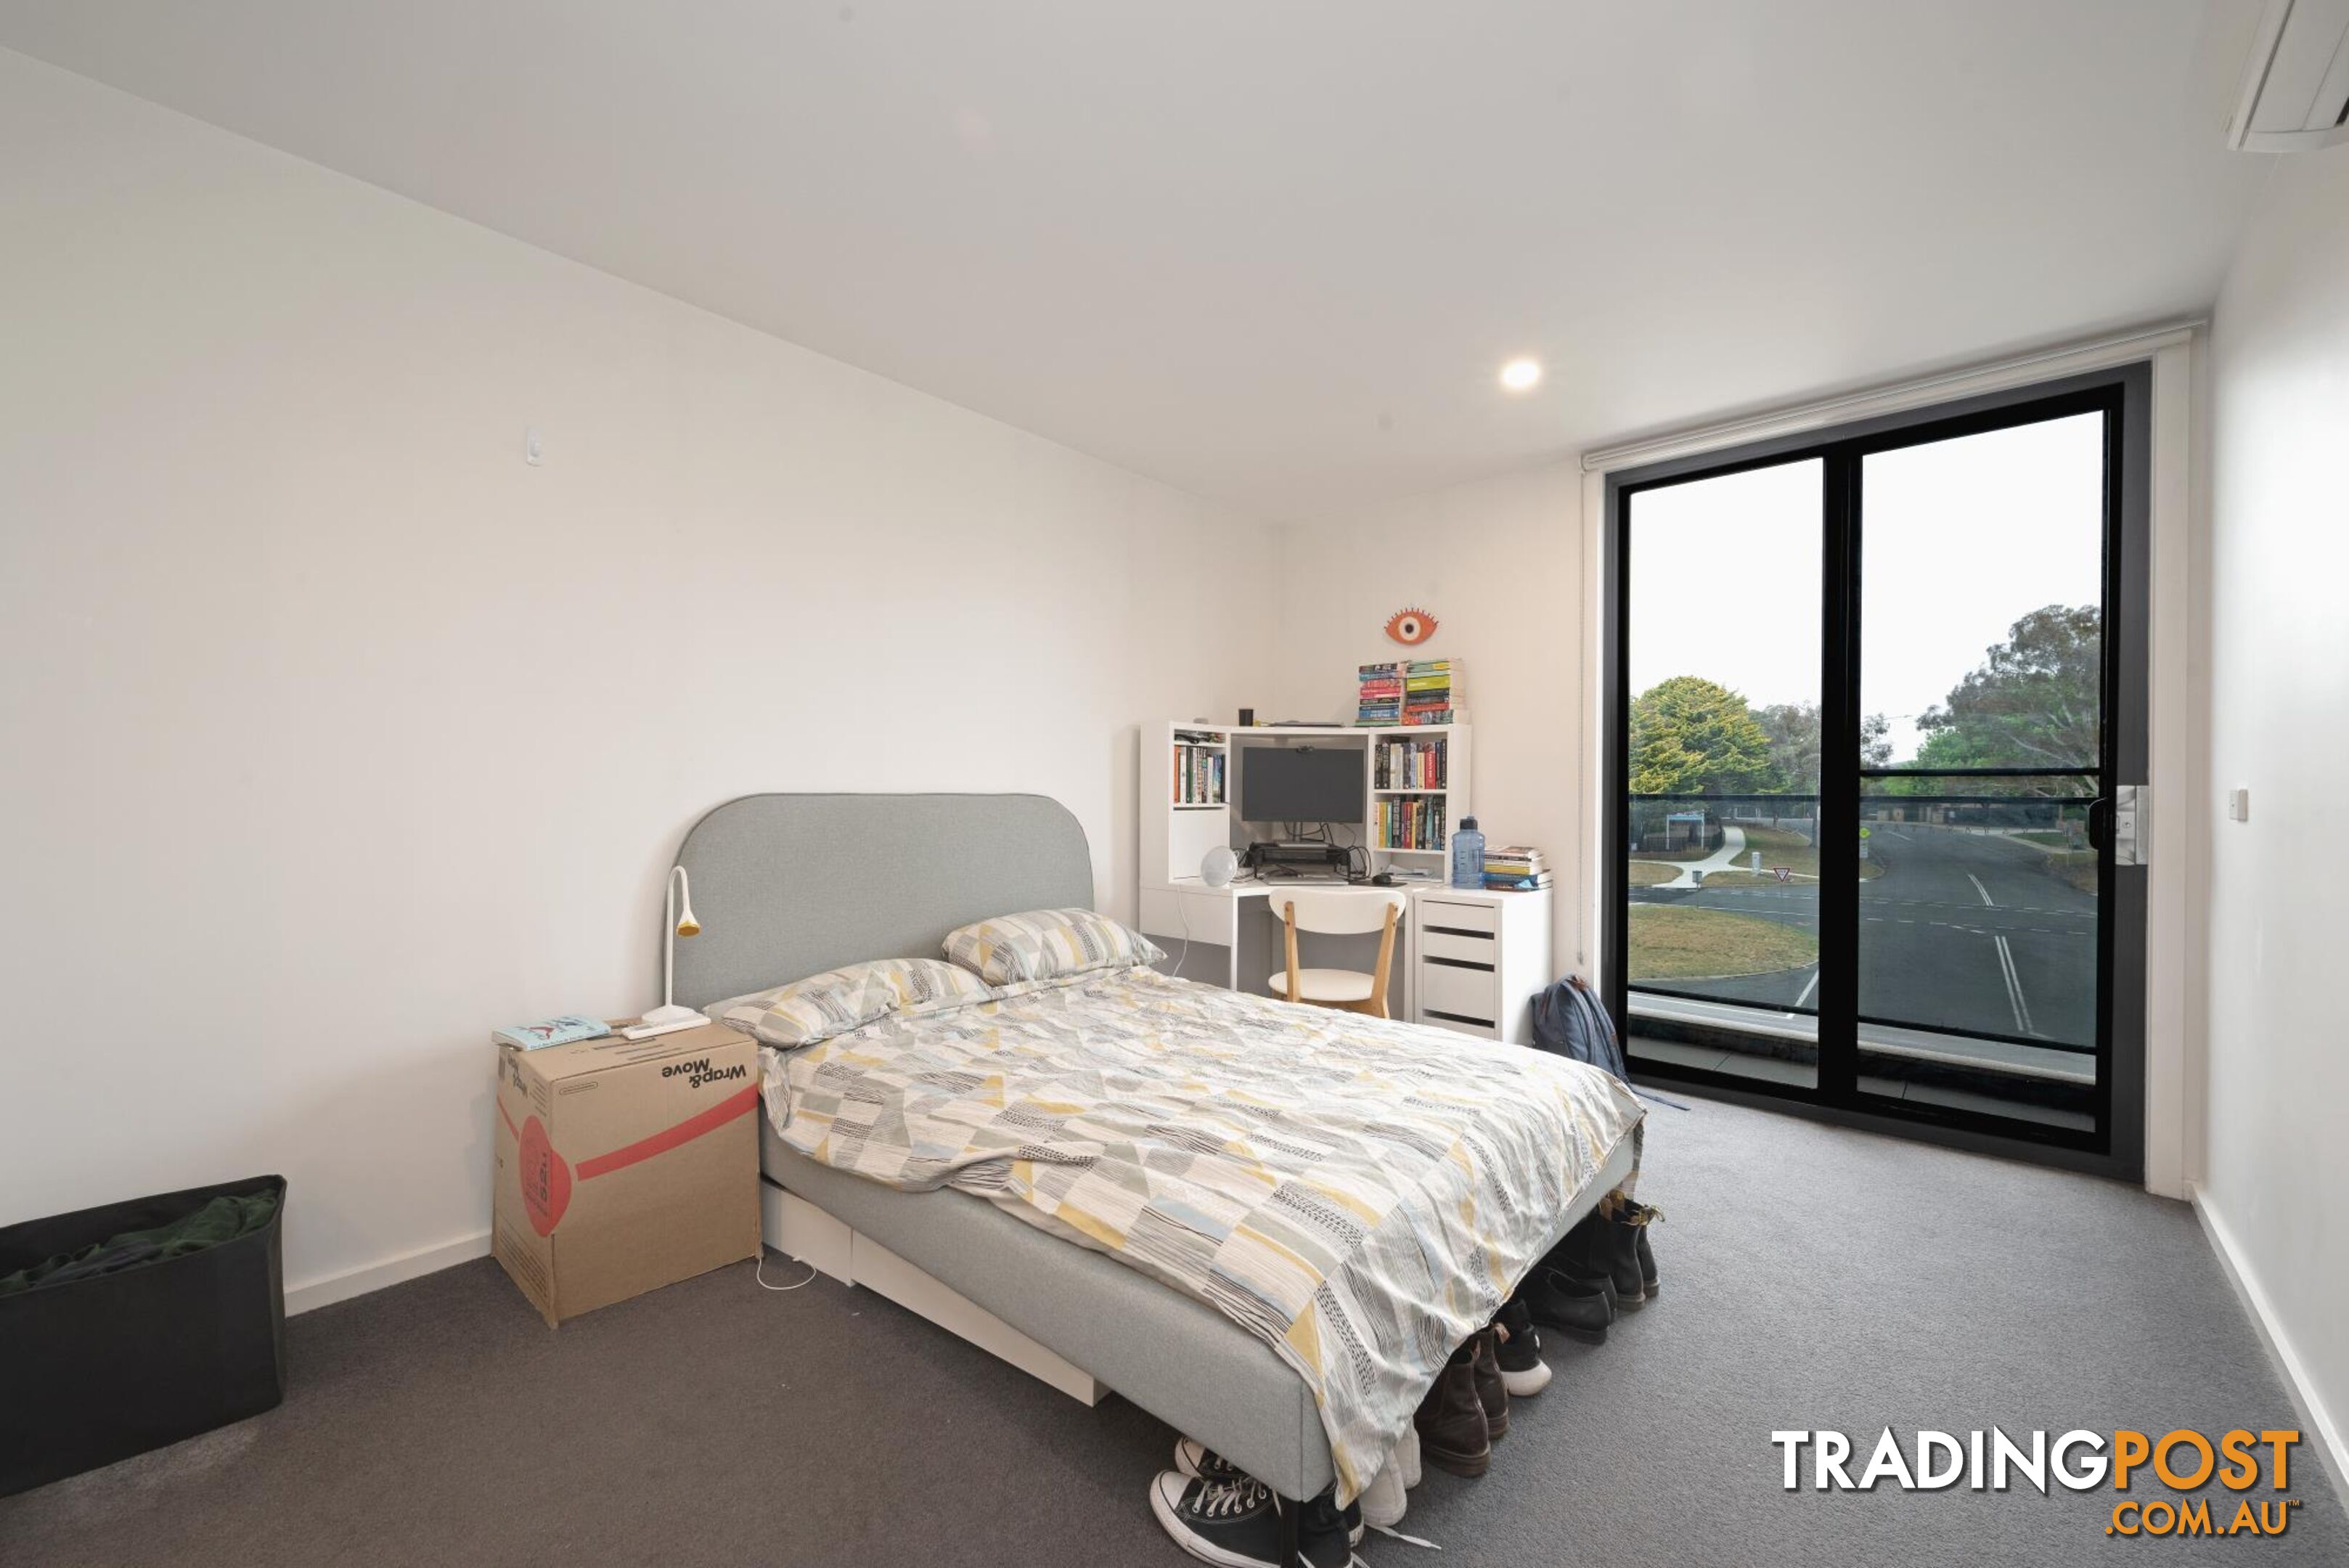 22/111 Canberra Avenue GRIFFITH ACT 2603